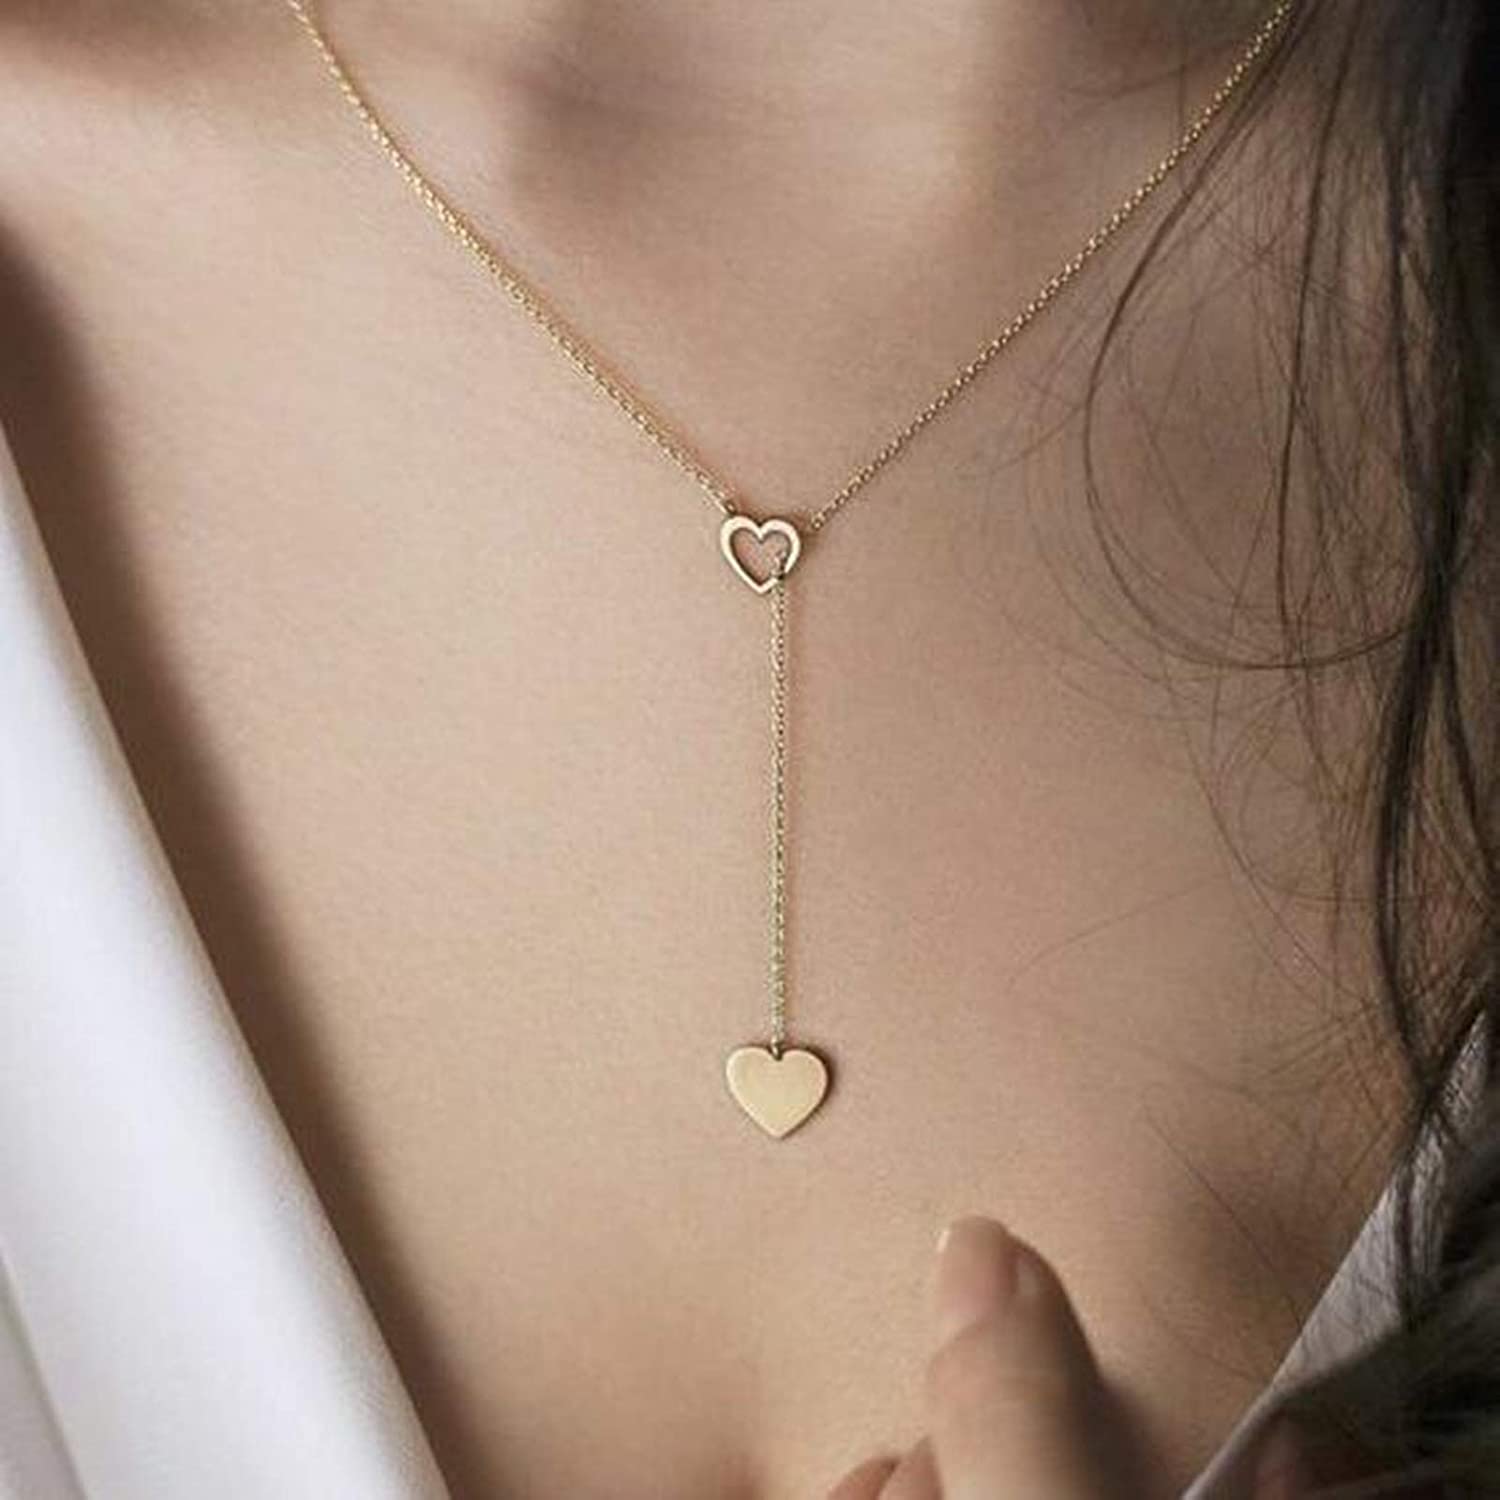 Arzonai European and American popular fashion new personality peach heart love pendant women's Y-shaped necklace